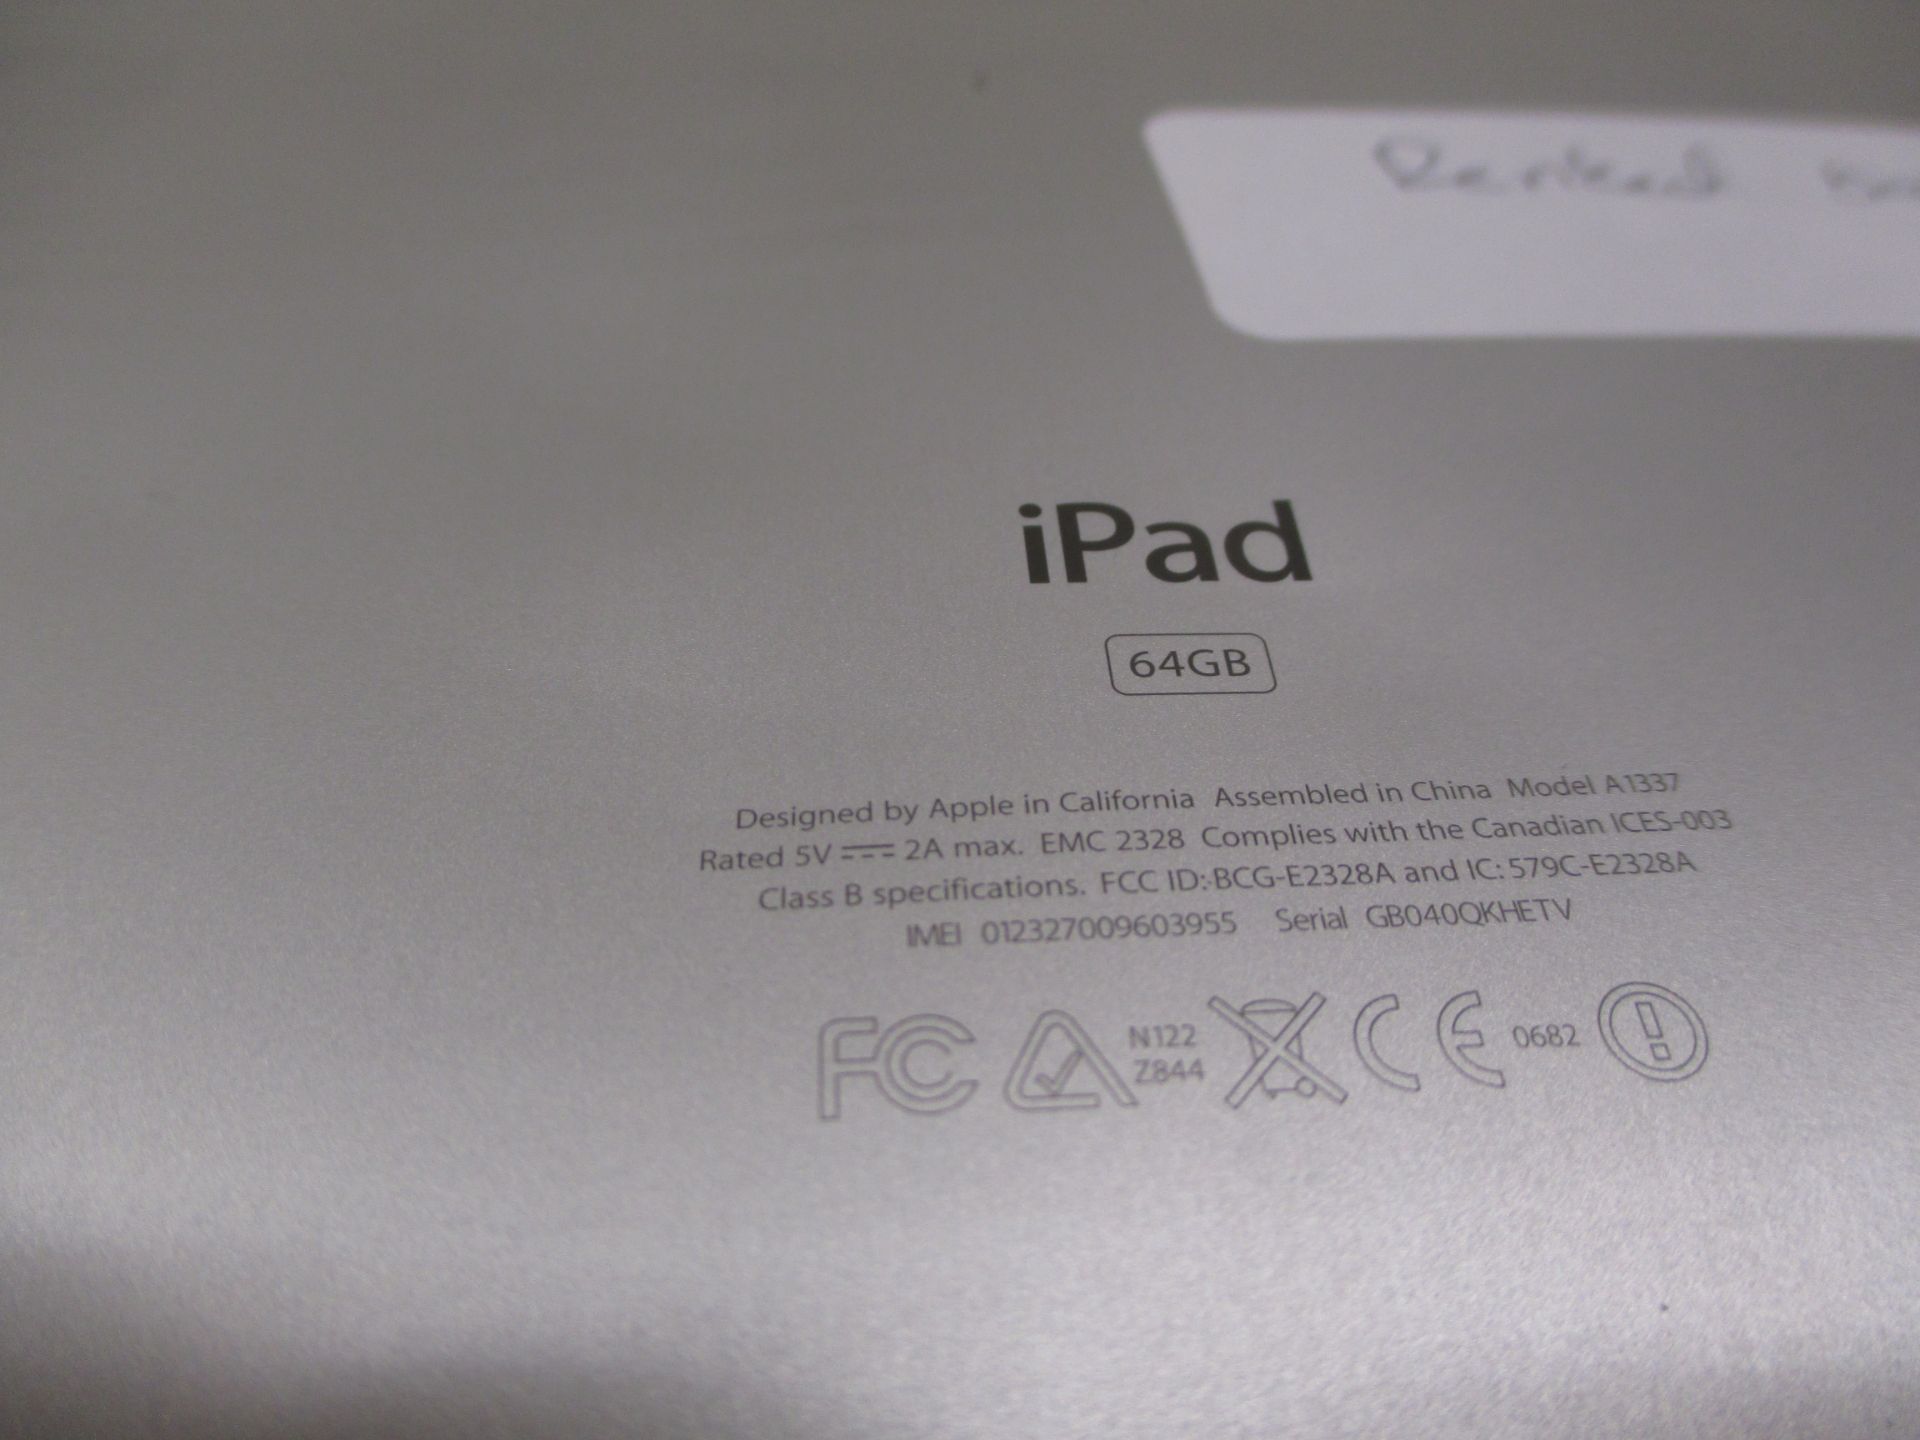 APPLE IPAD 64GB A1337 (BACK COVER SLIGHTLY DENTED - SEE PHOTOS) WITH CASE - Image 4 of 6